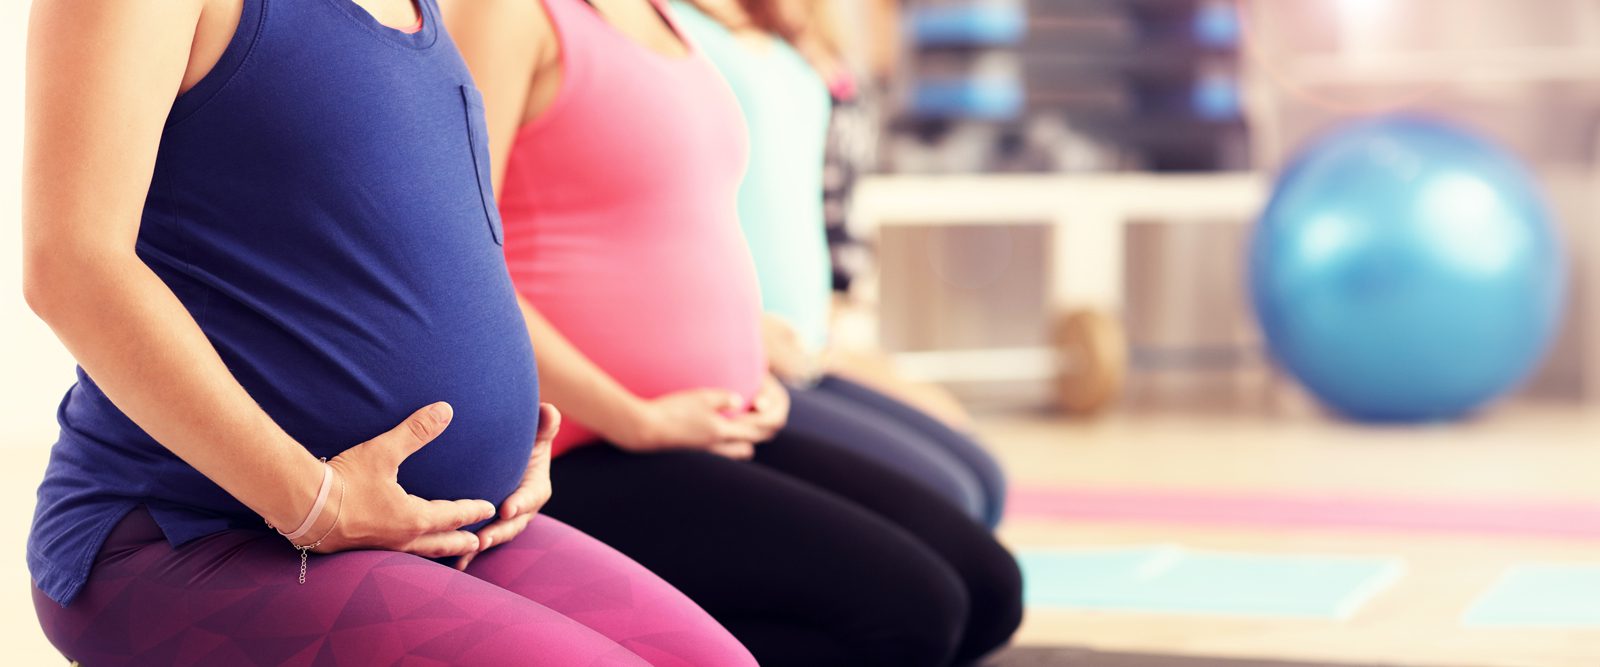 starting a fitness journey while pregnant